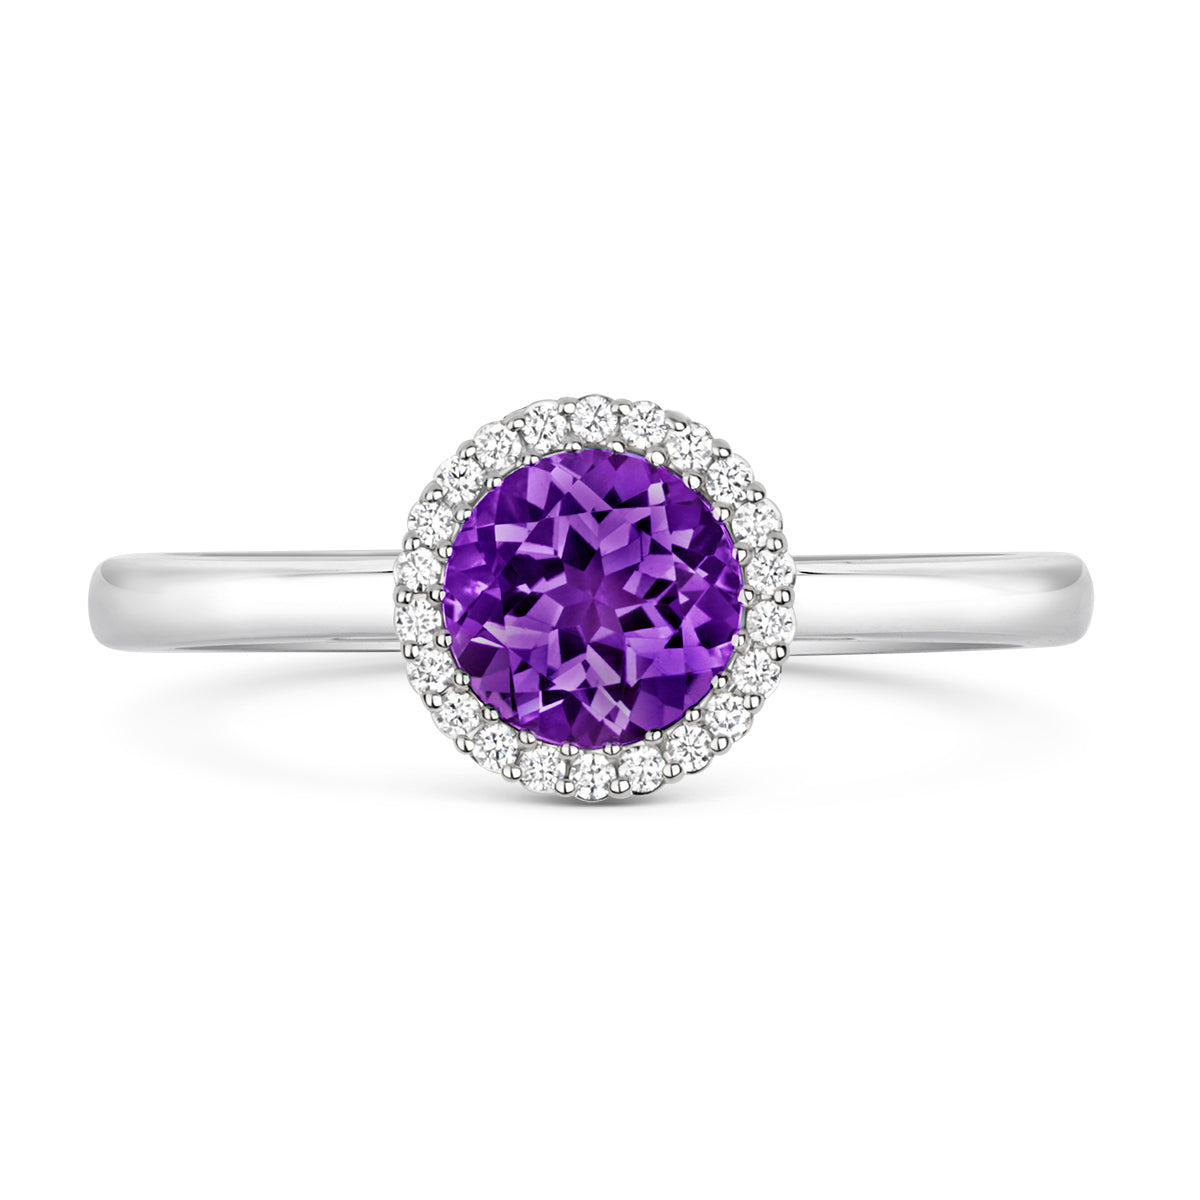 18ct White Gold Round Brilliant Cut Amethyst and Diamond Ring